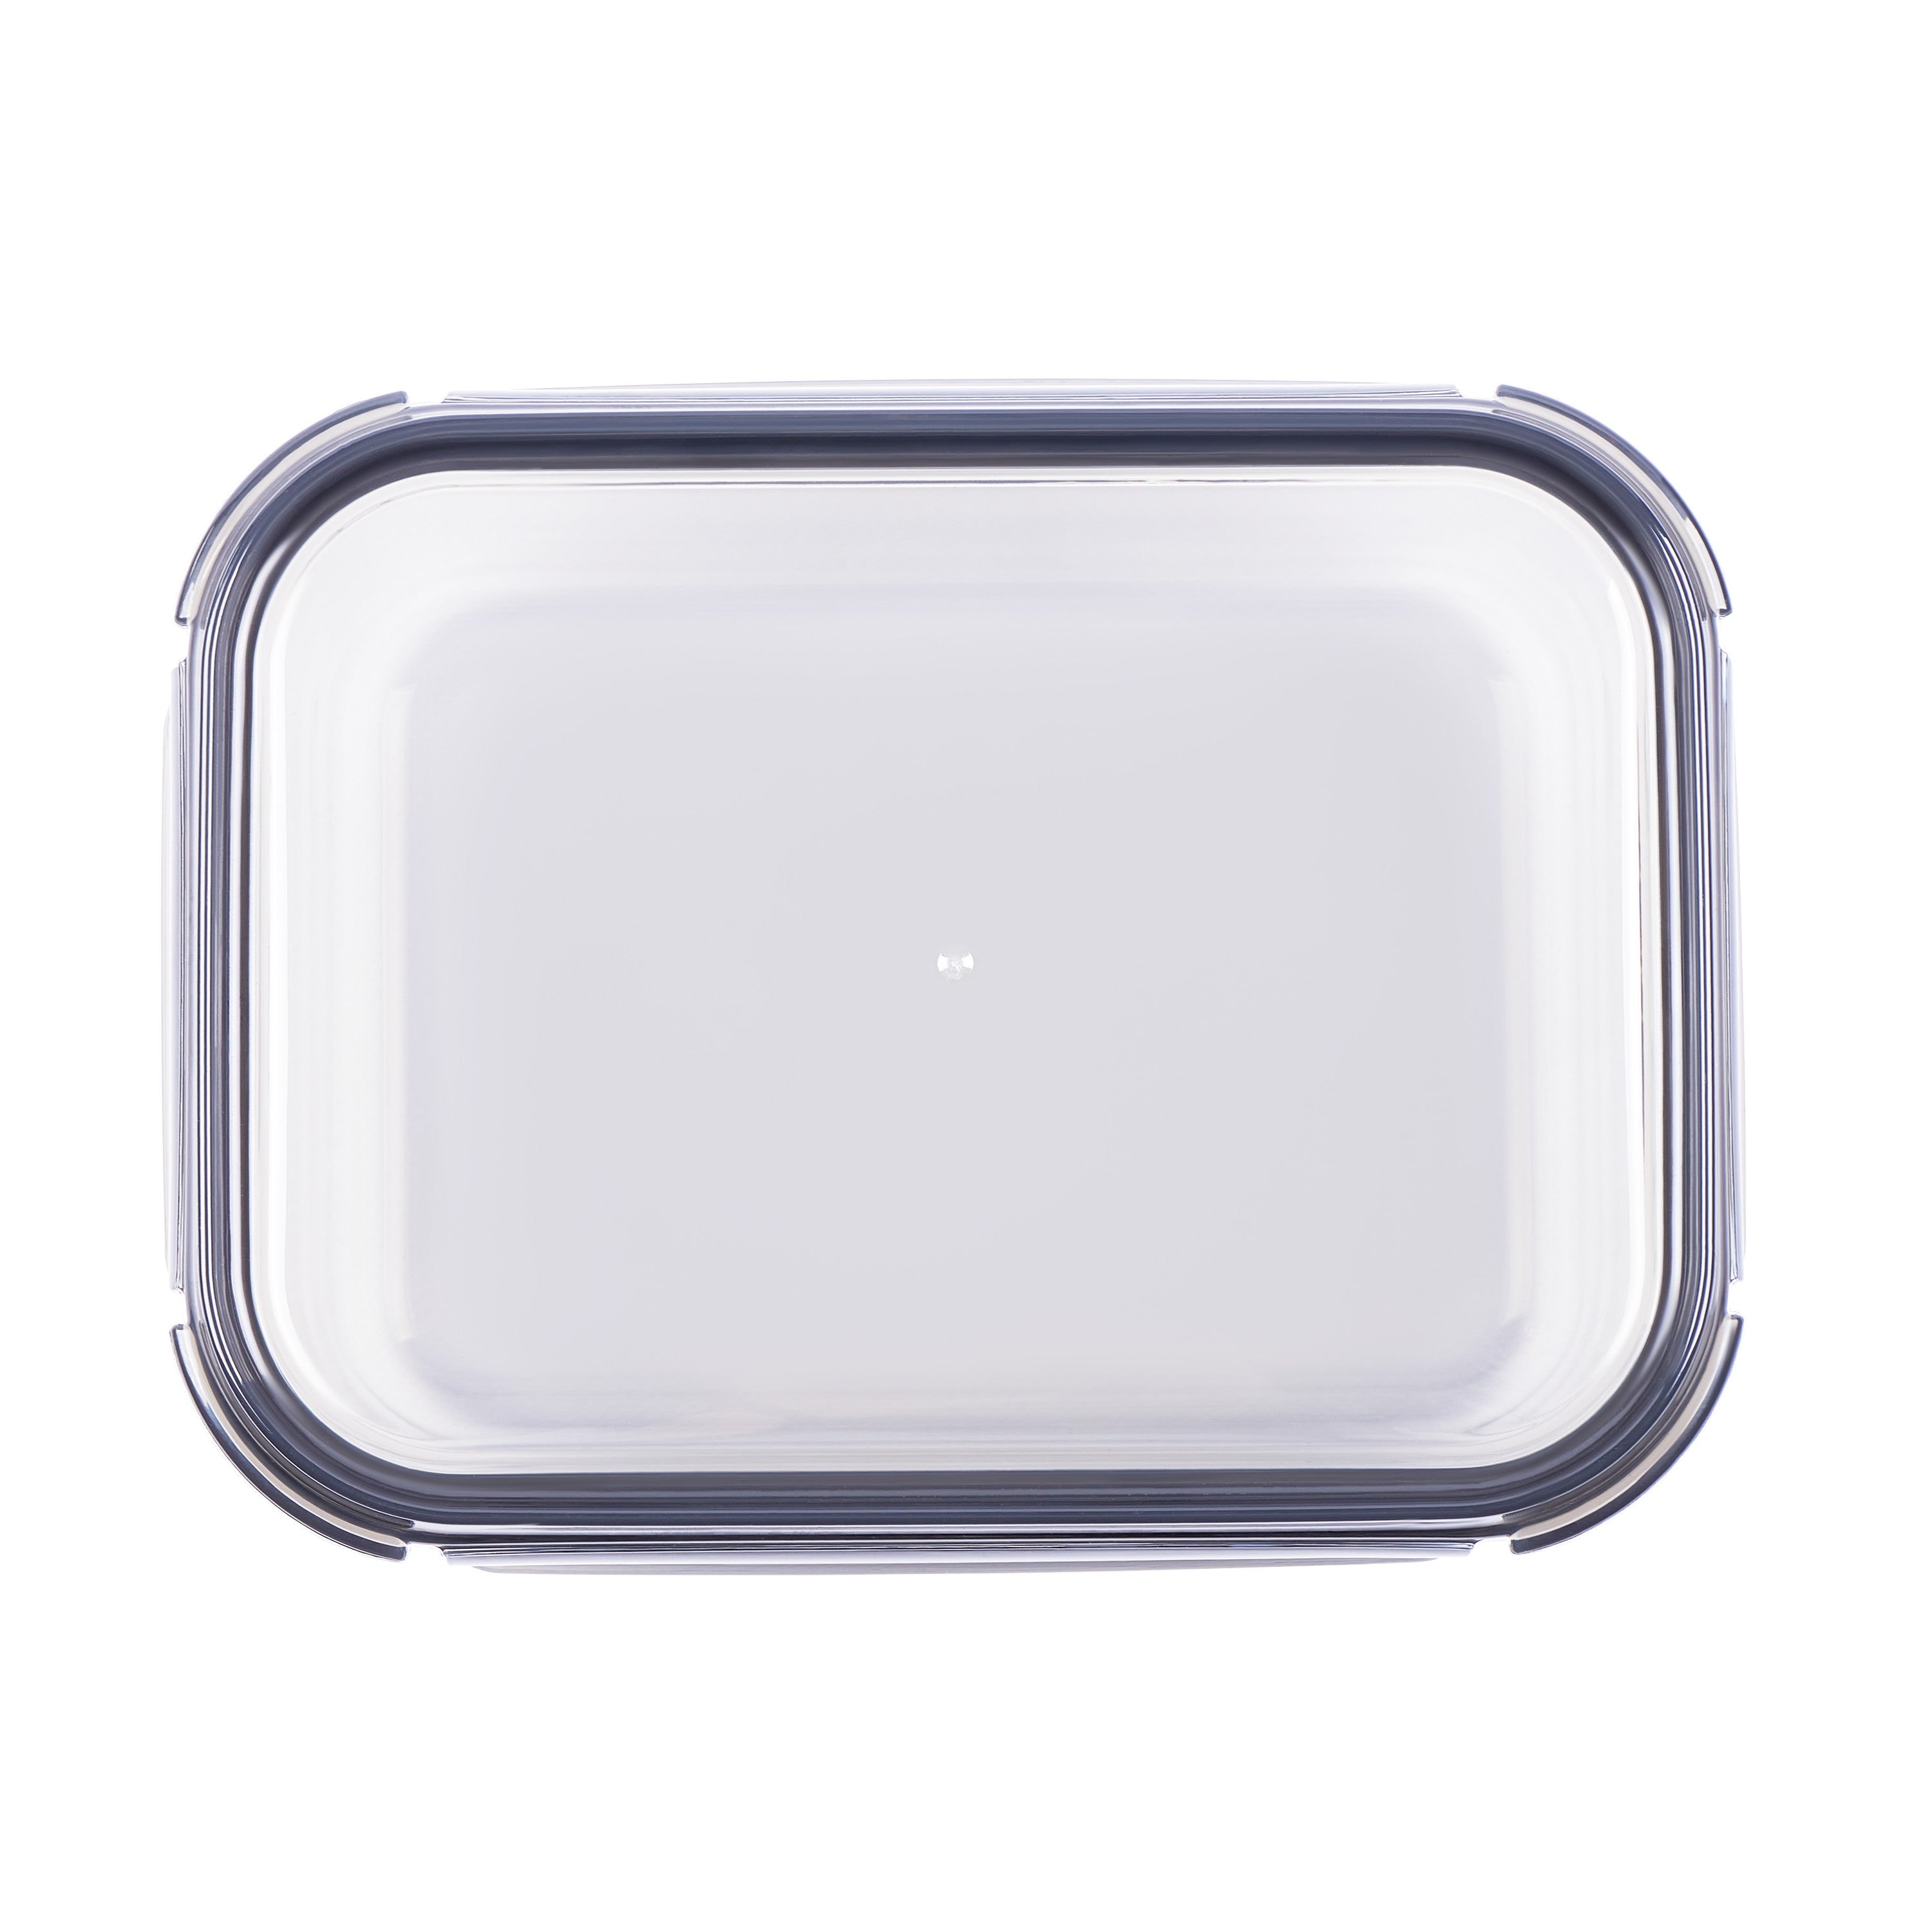 Container for storing products 1.5 l Artglas 